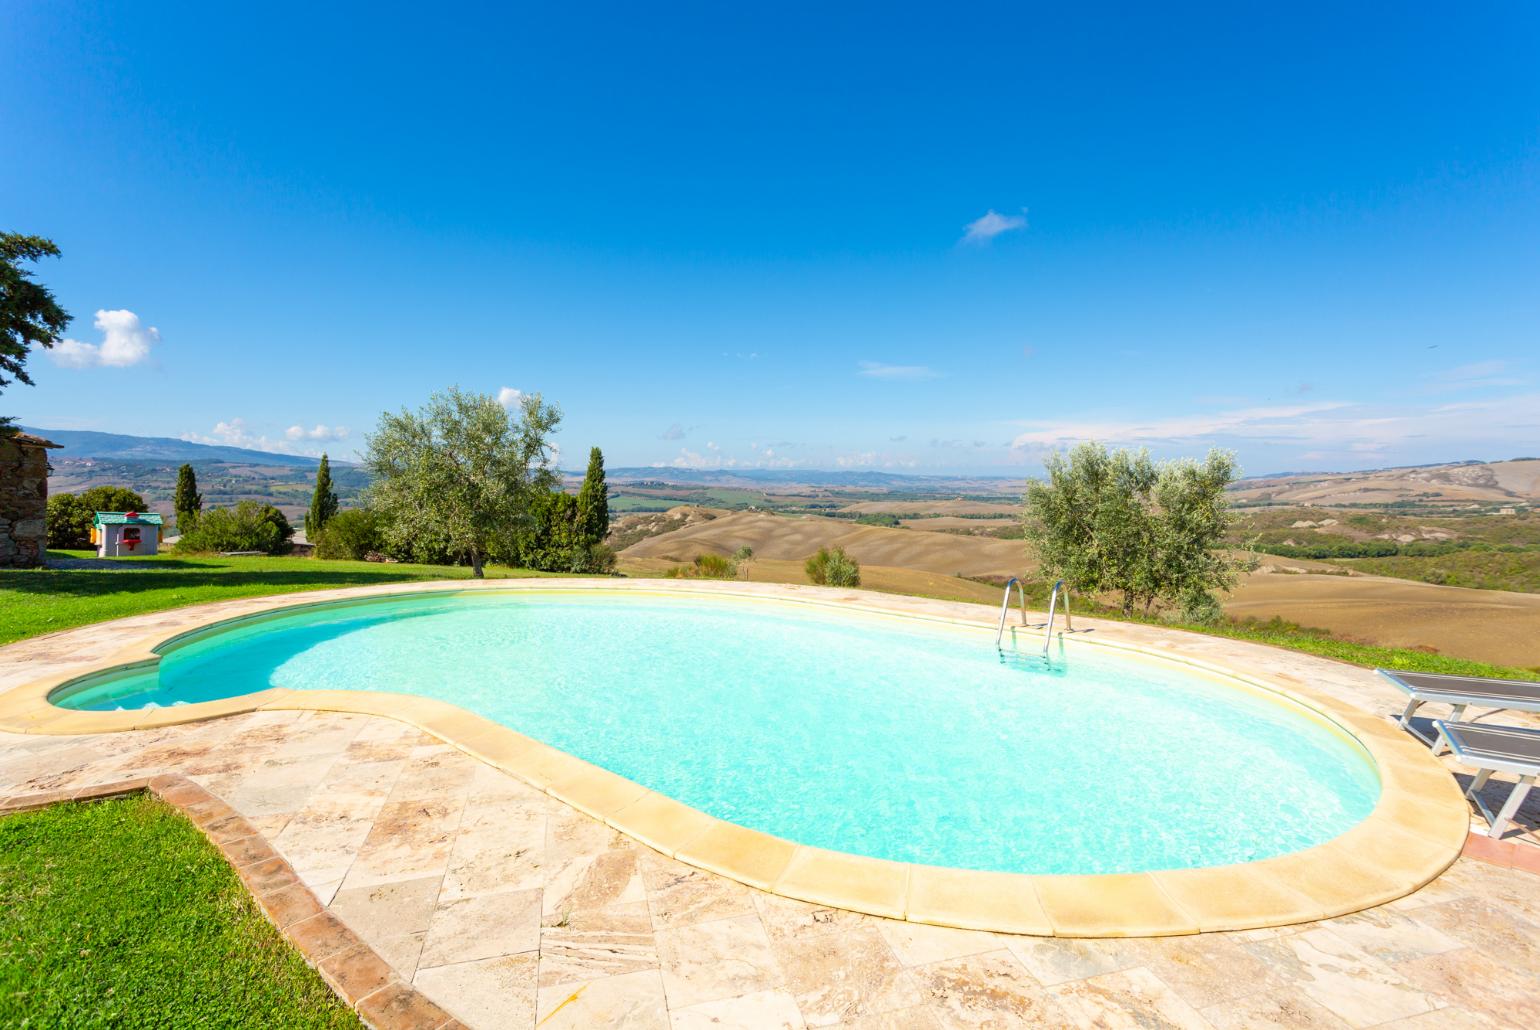 Private pool, terrace, and large lawn with panoramic Tuscan views